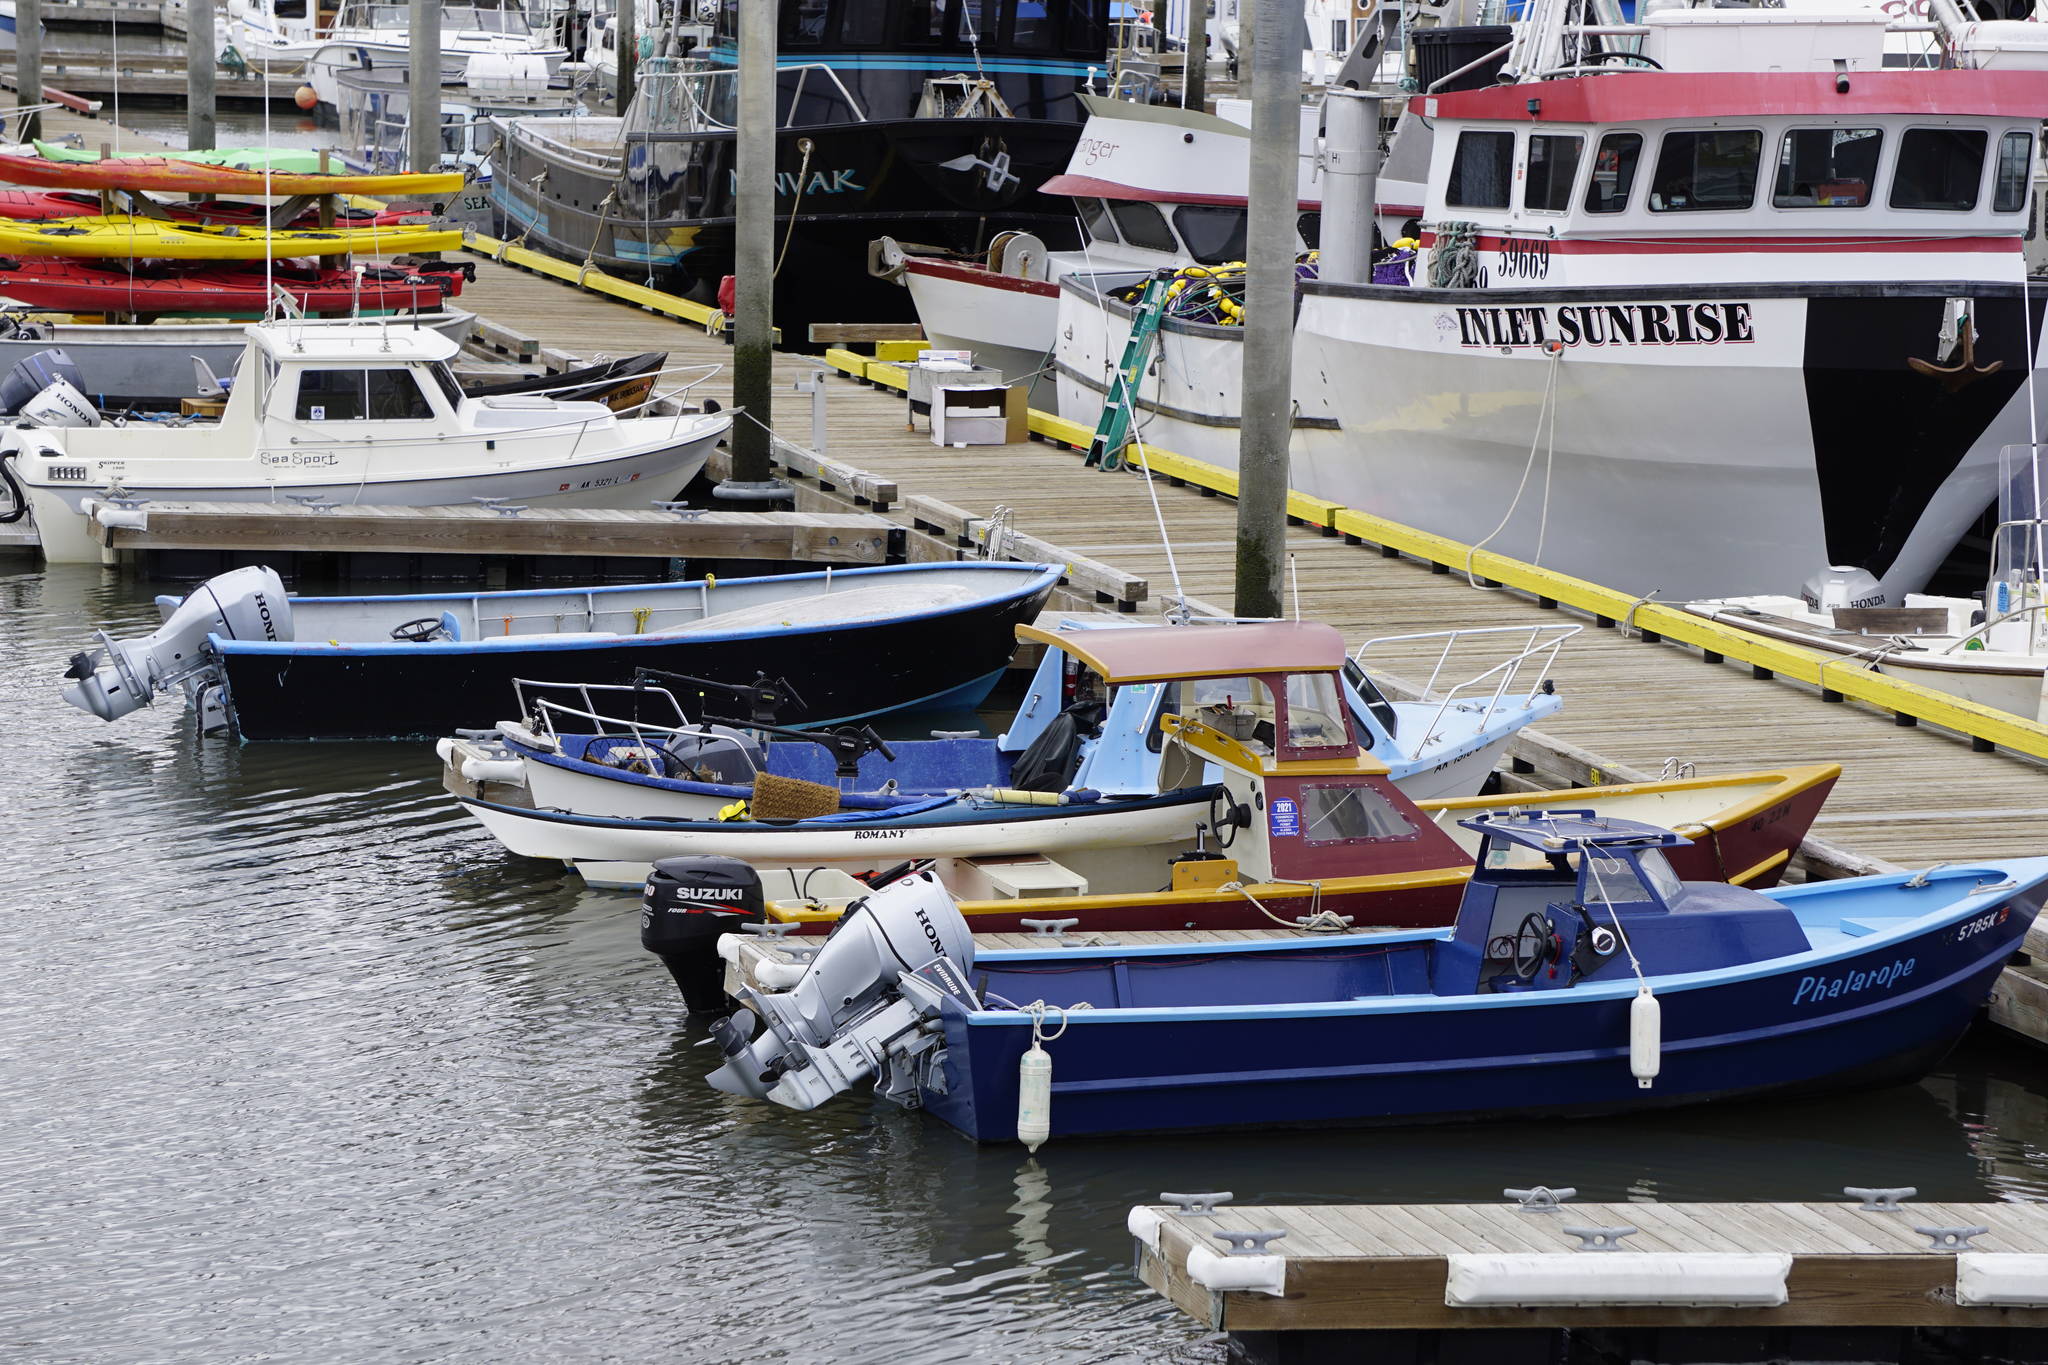 A row of skiffs and small boats are moored on Friday, May 21, 2021, at the Homer Harbor in Homer, Alaska. (Photo by Michael Armstrong/Homer News)